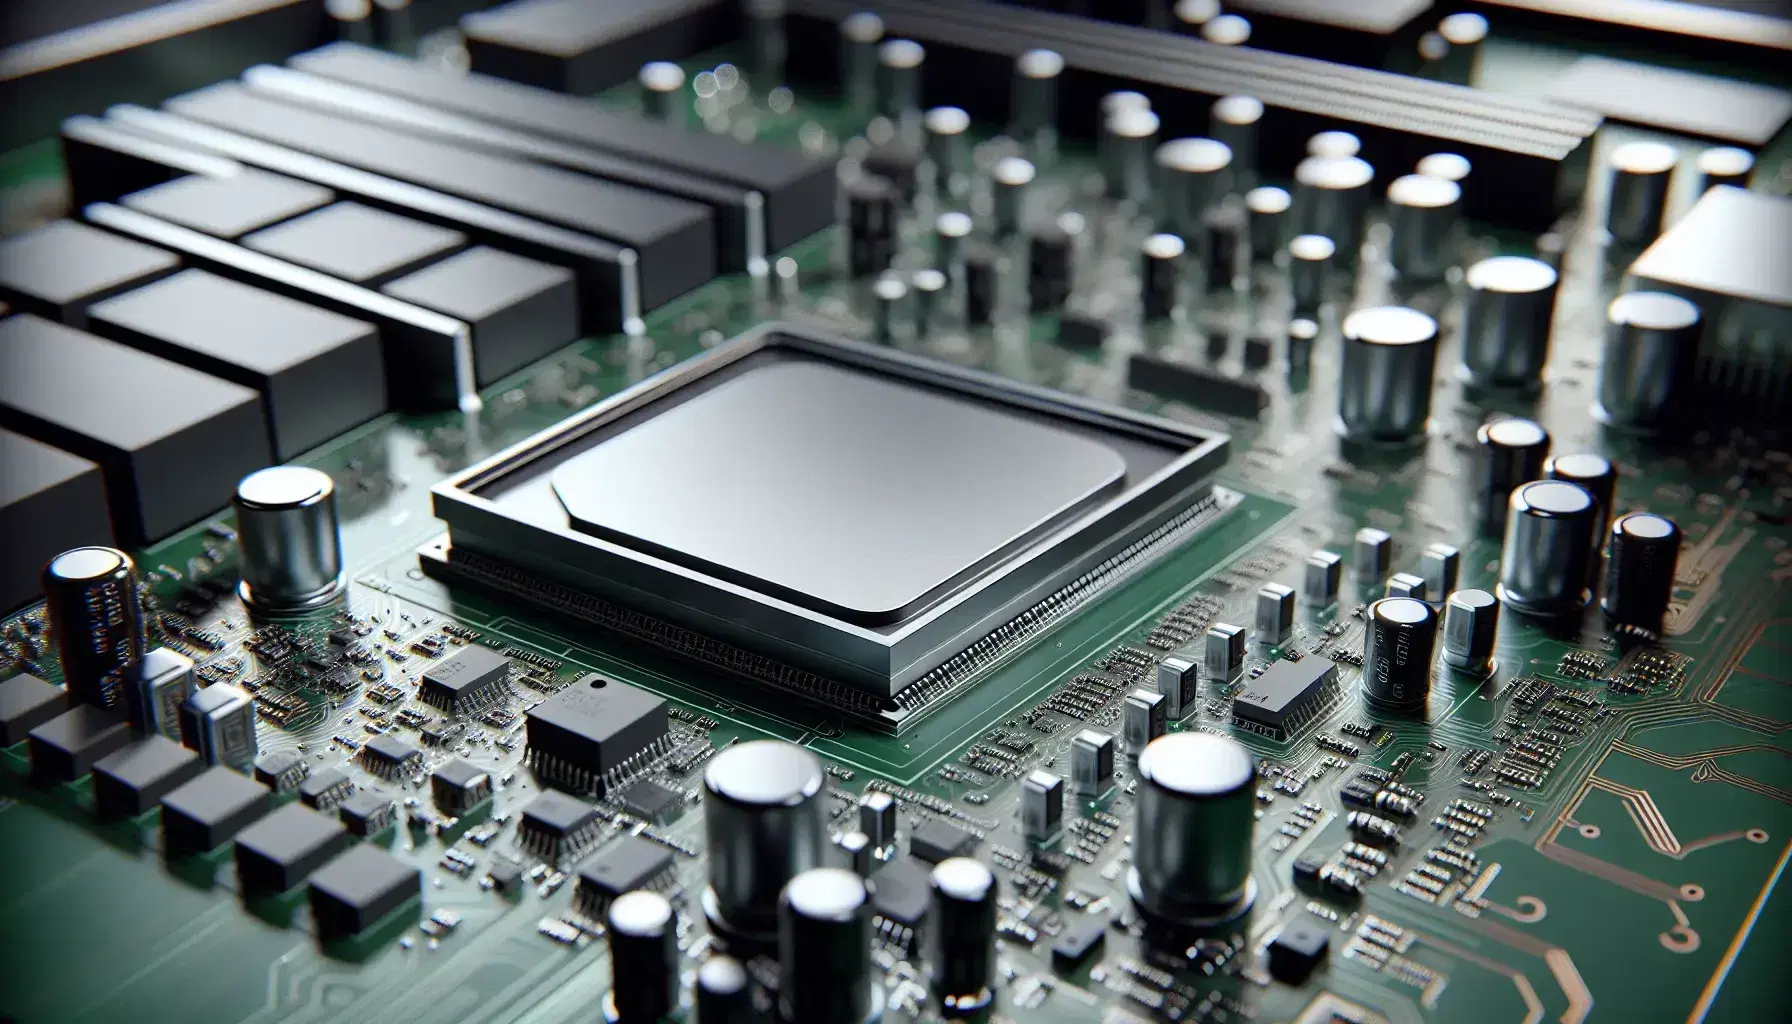 Close-up of a motherboard with silver CPU, black integrated circuits, cylindrical capacitors and copper traces on a green background.